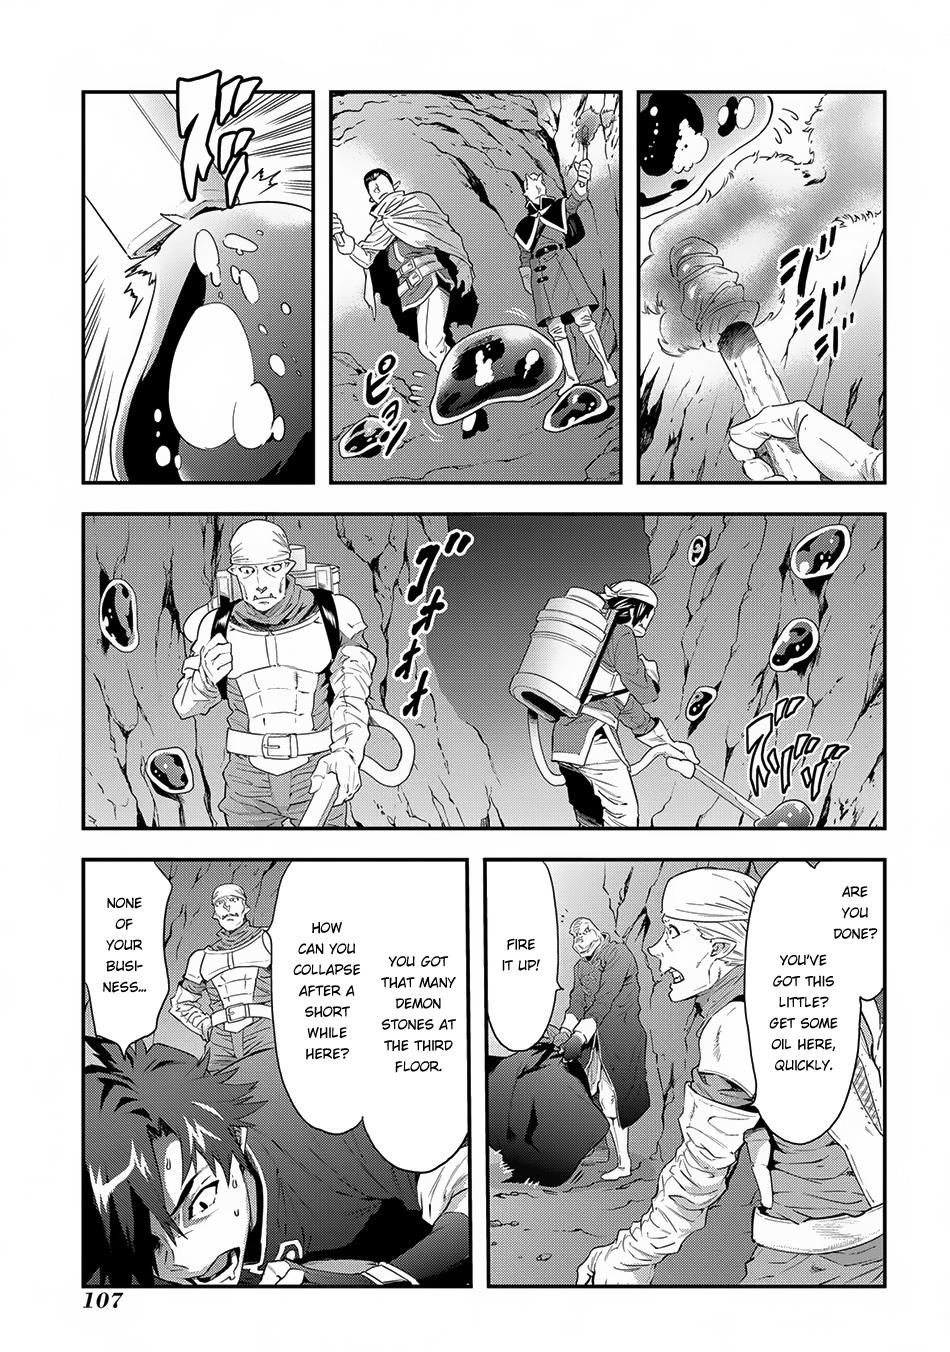 Read Meikyuu Black Company Vol.7 Chapter 33.1: The Battle Of The  Unattractive (Part One) on Mangakakalot